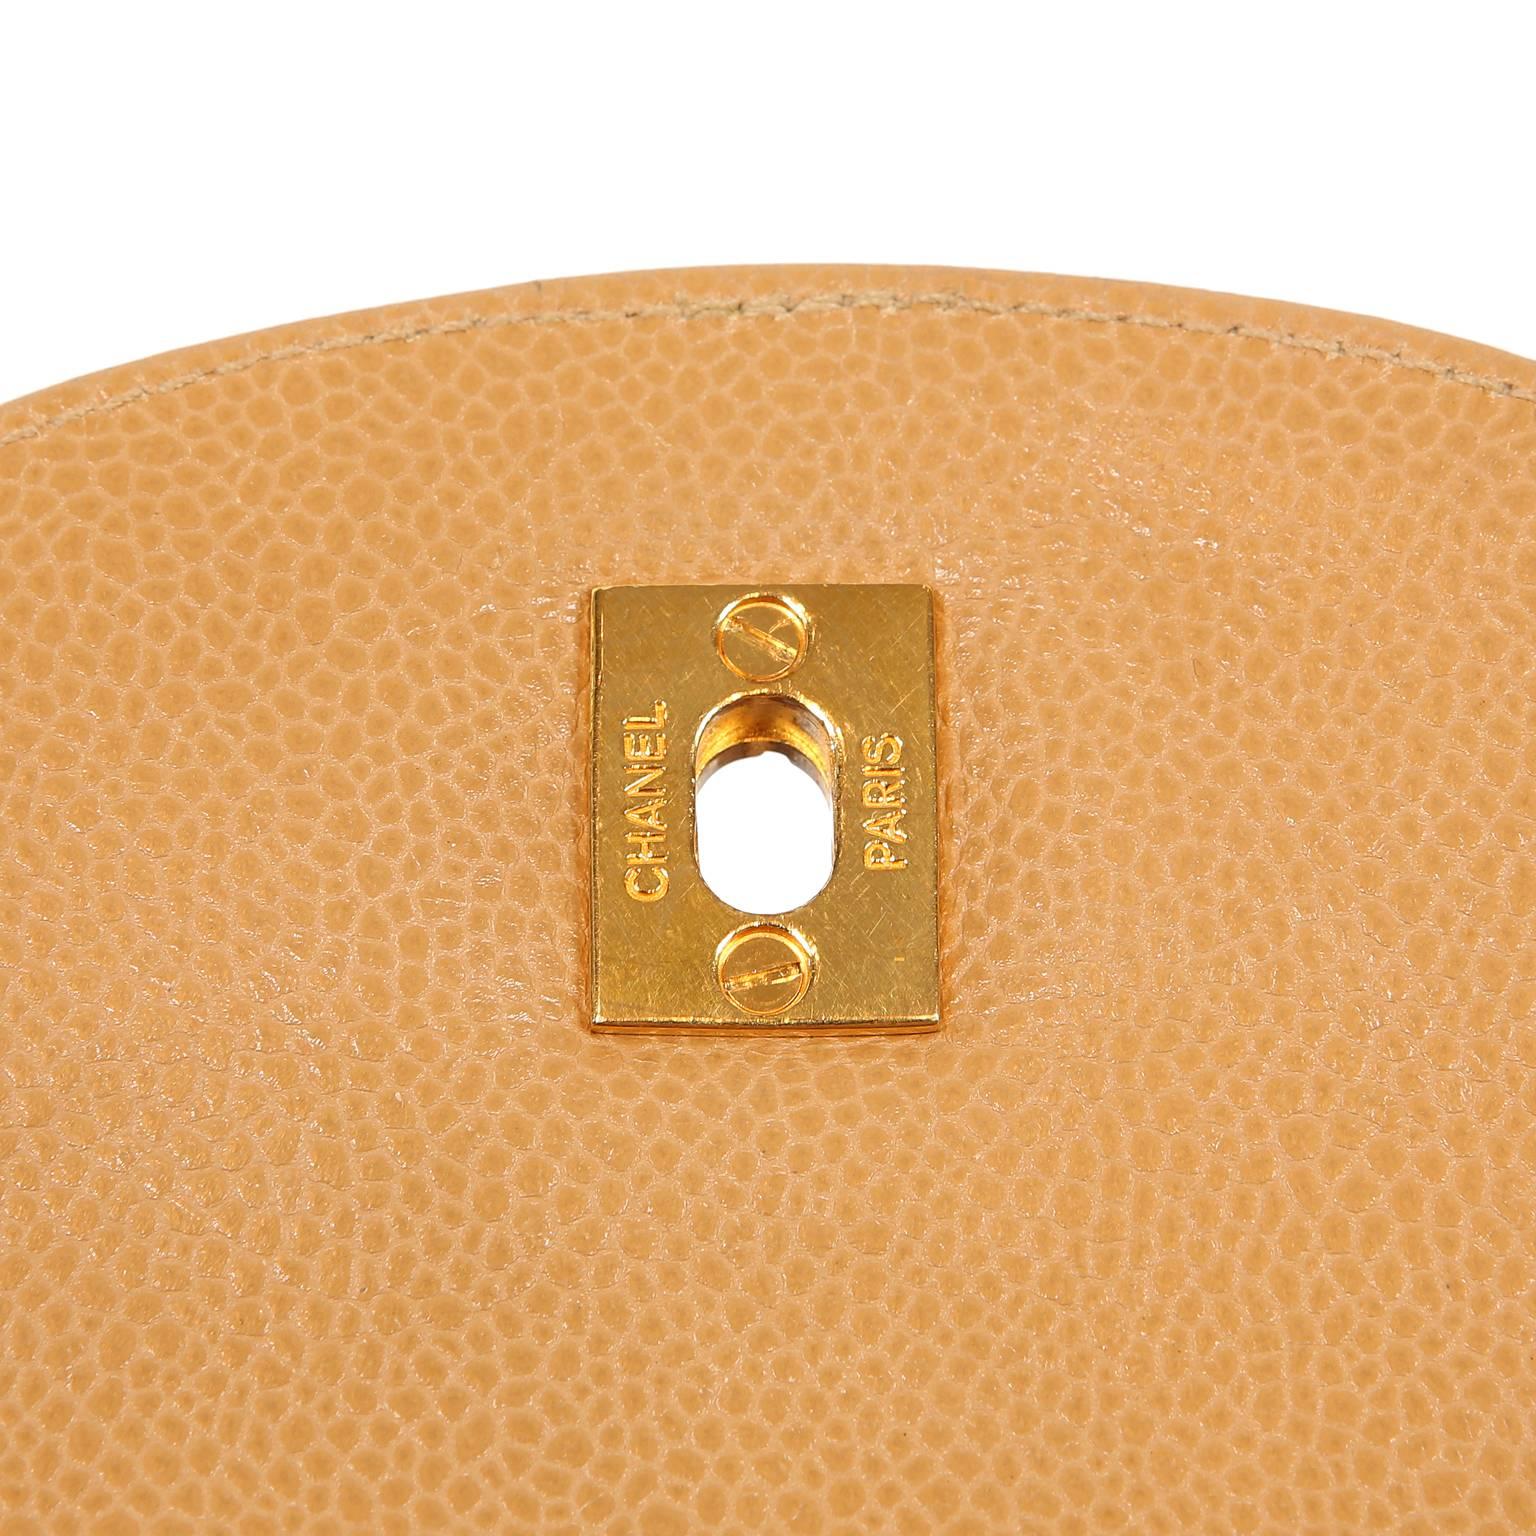 Chanel Camel Caviar Leather Backpack 12